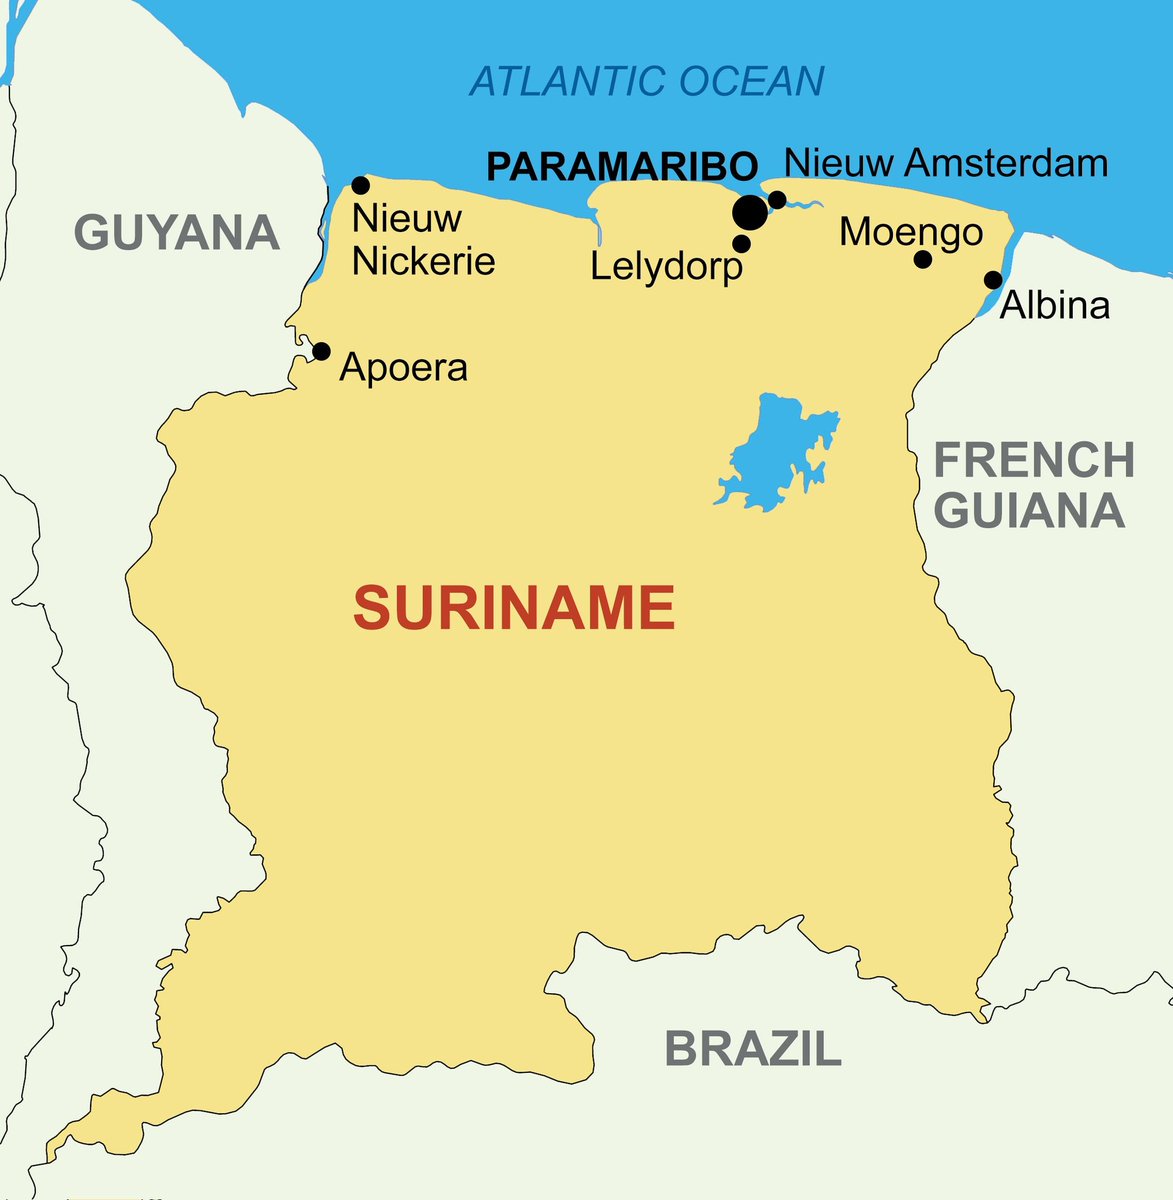 @MyanmarNet_ Suriname looks like this, not like The map shown in the video.